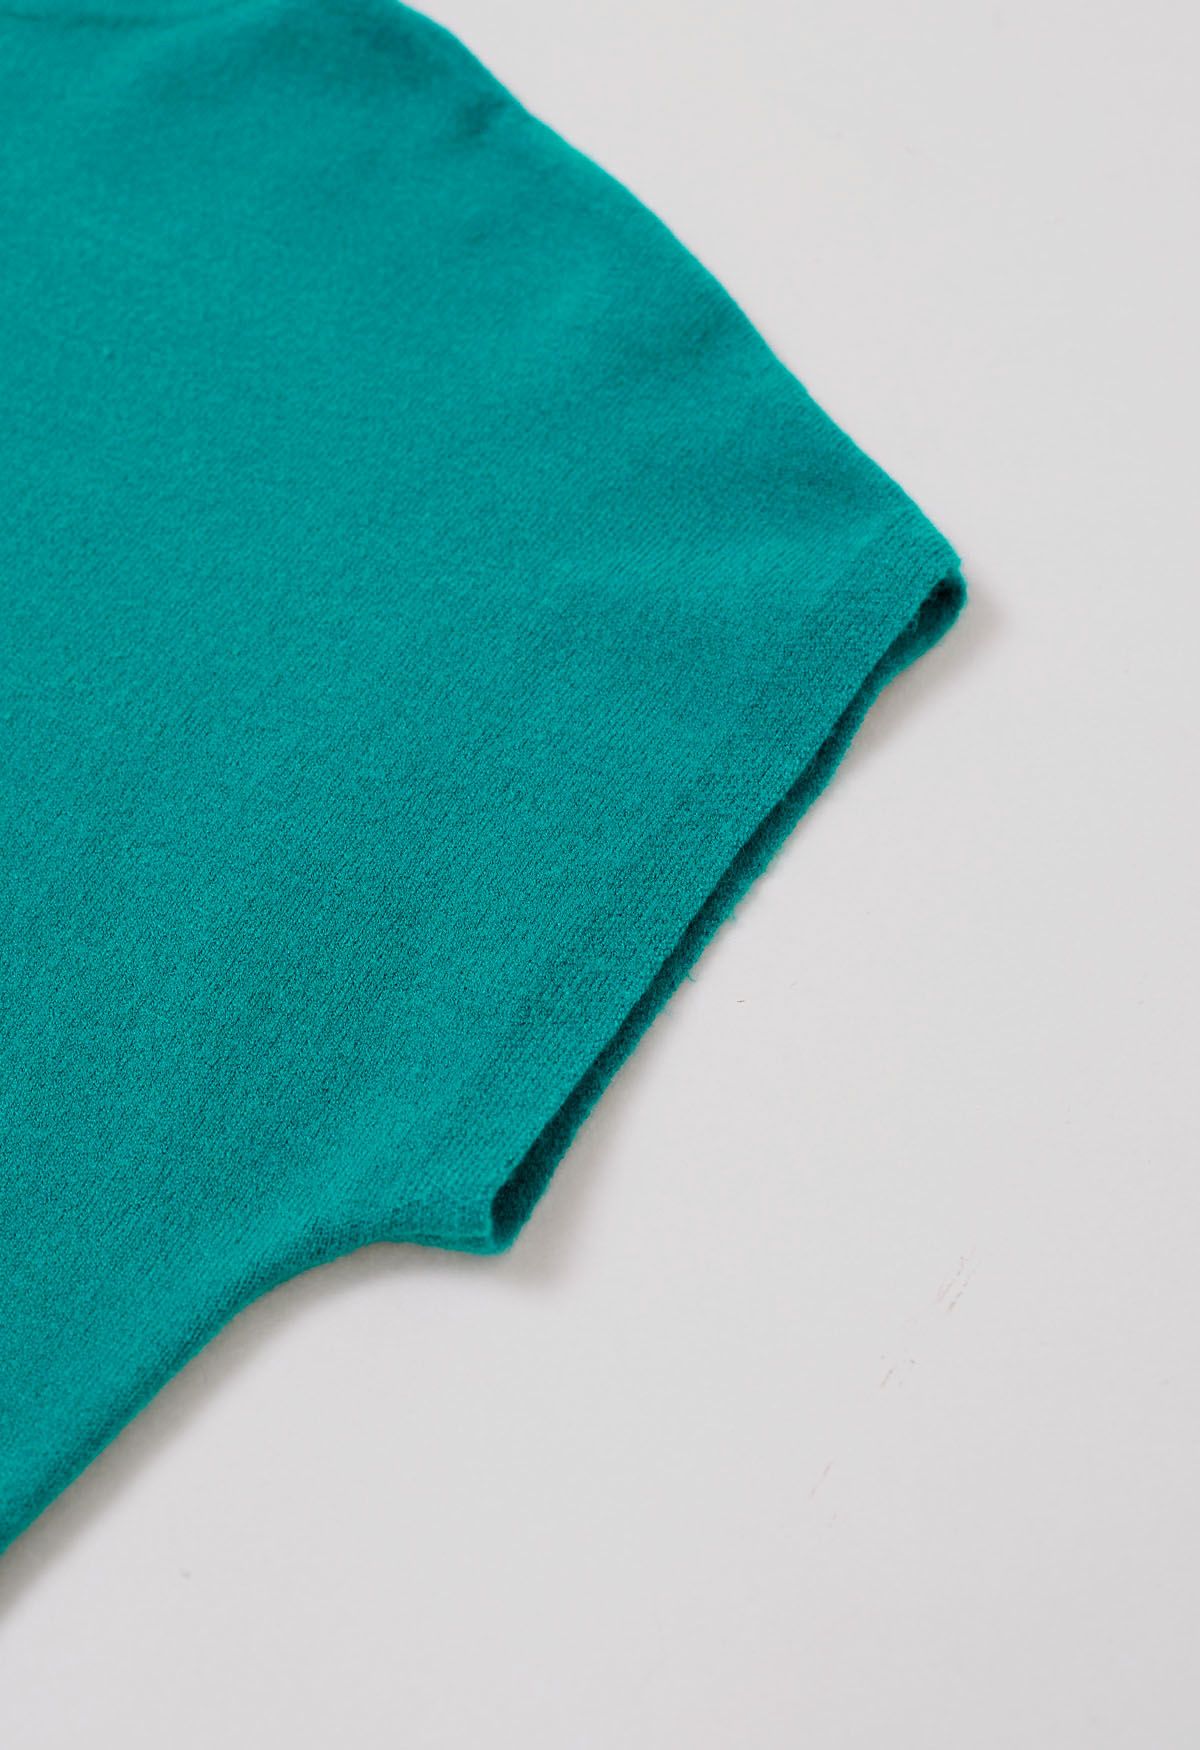 Solid Color Cap Sleeves Knit Top in Turquoise